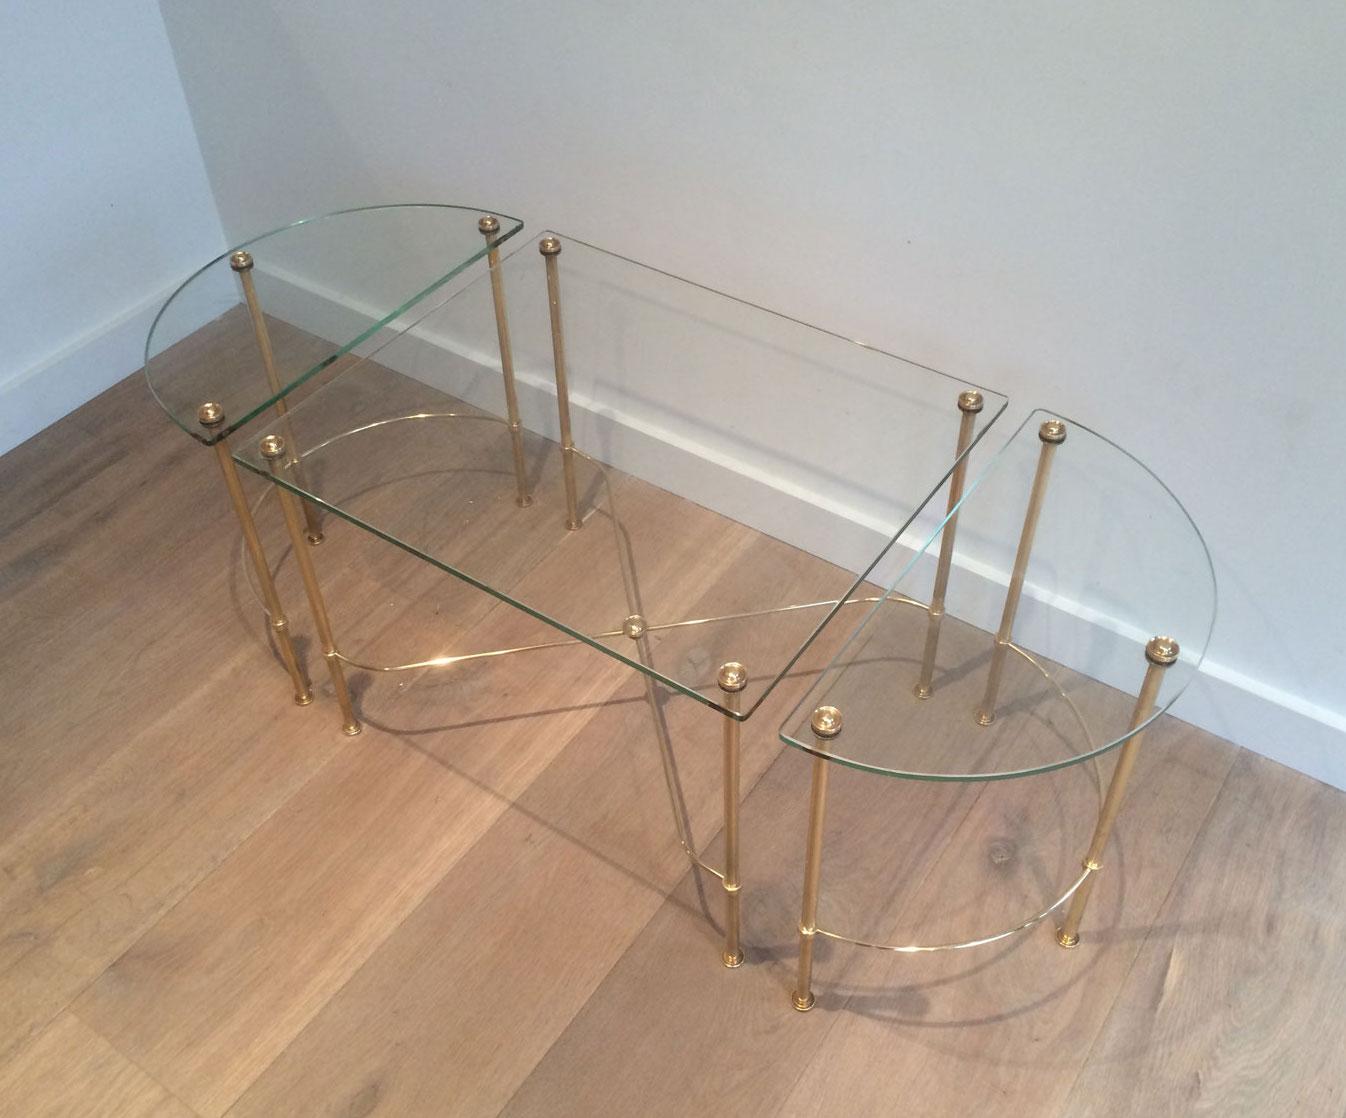 This beautiful neoclassical style tripartite coffee table is made of brass with glass shelves rounded on the side tables. This is a very nice work by famous French designer Maison Bagués, circa 1970.